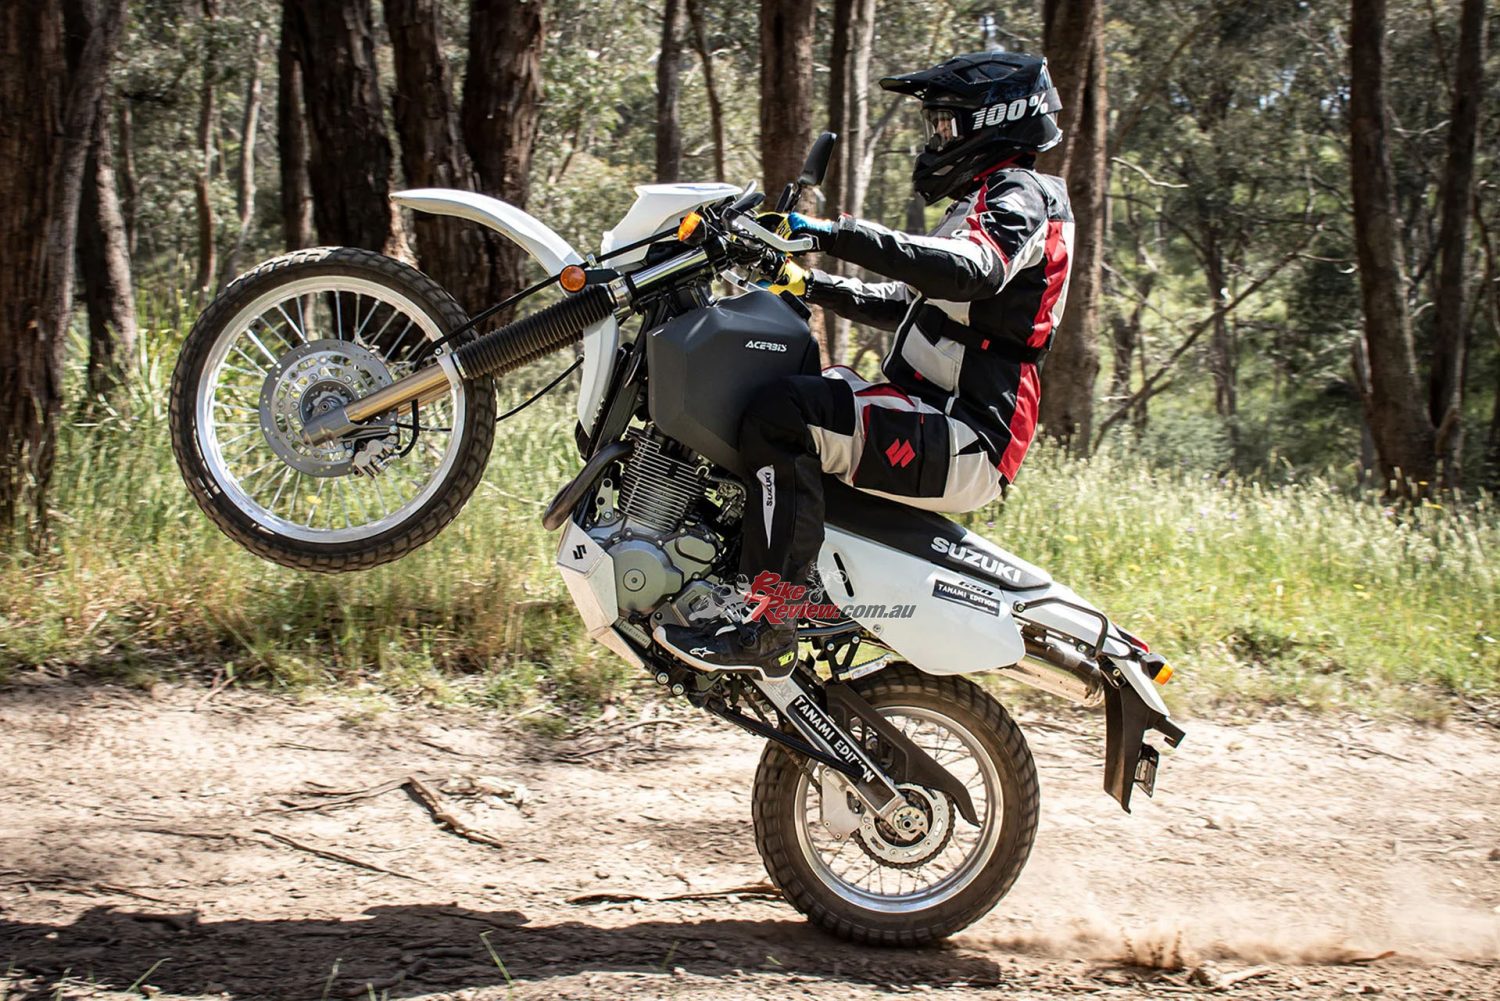 Your last chance to grab a DR650, the versatile big single much loved by Australian riders.